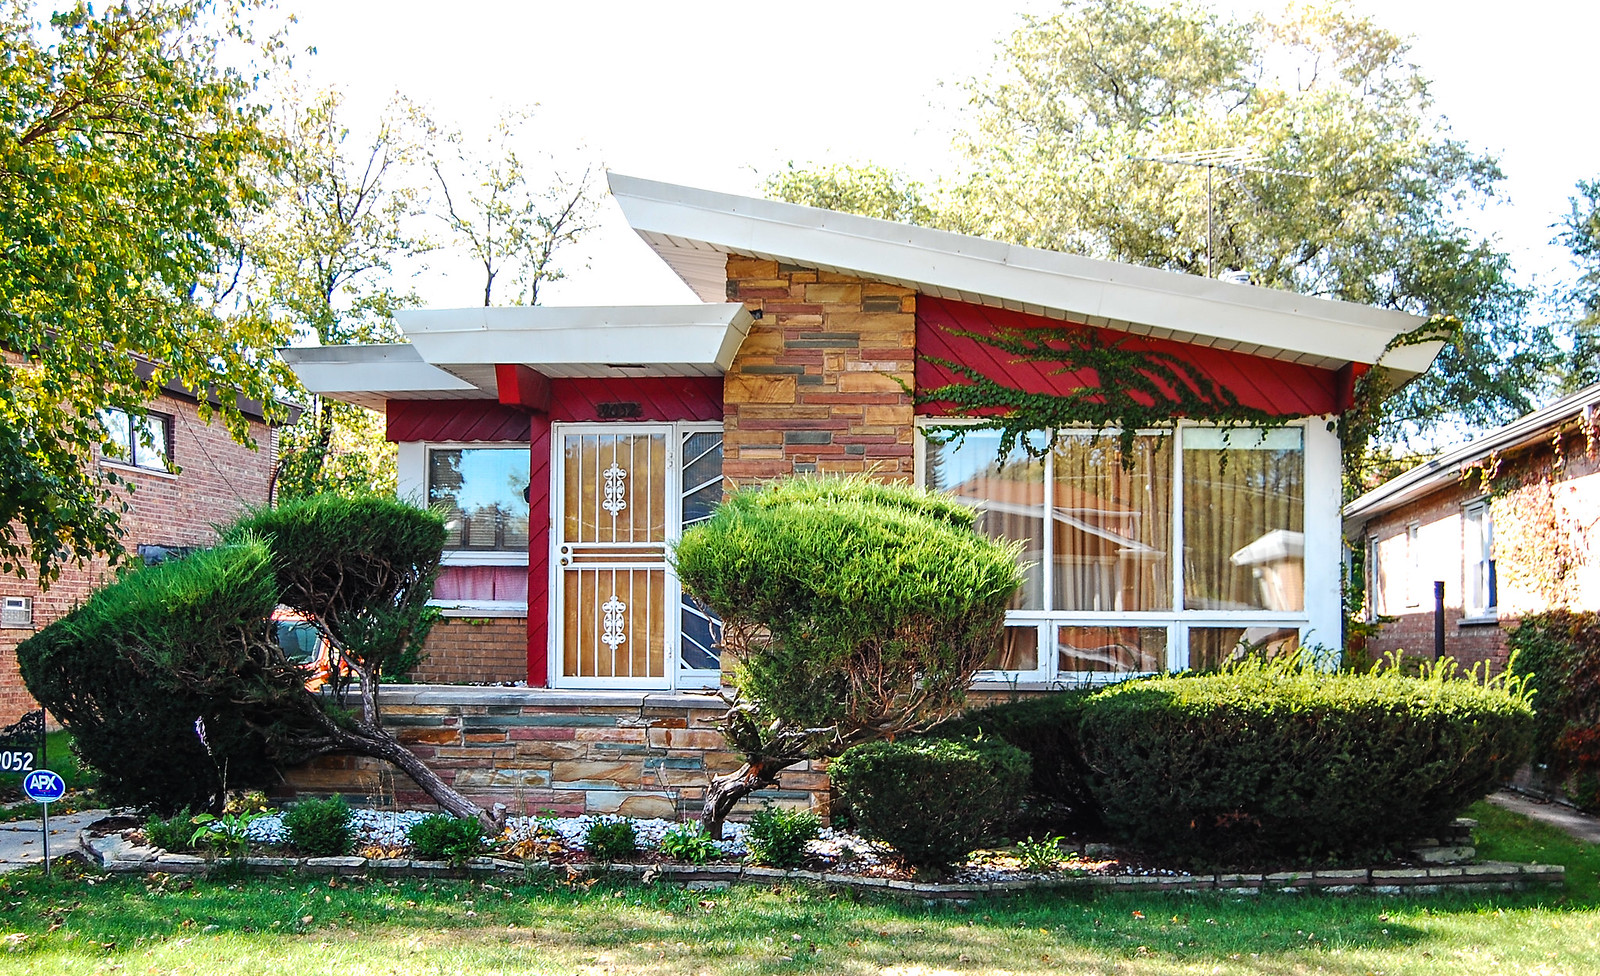 House of the Day #81: 9032 S. Chappel, This mid-century hou…